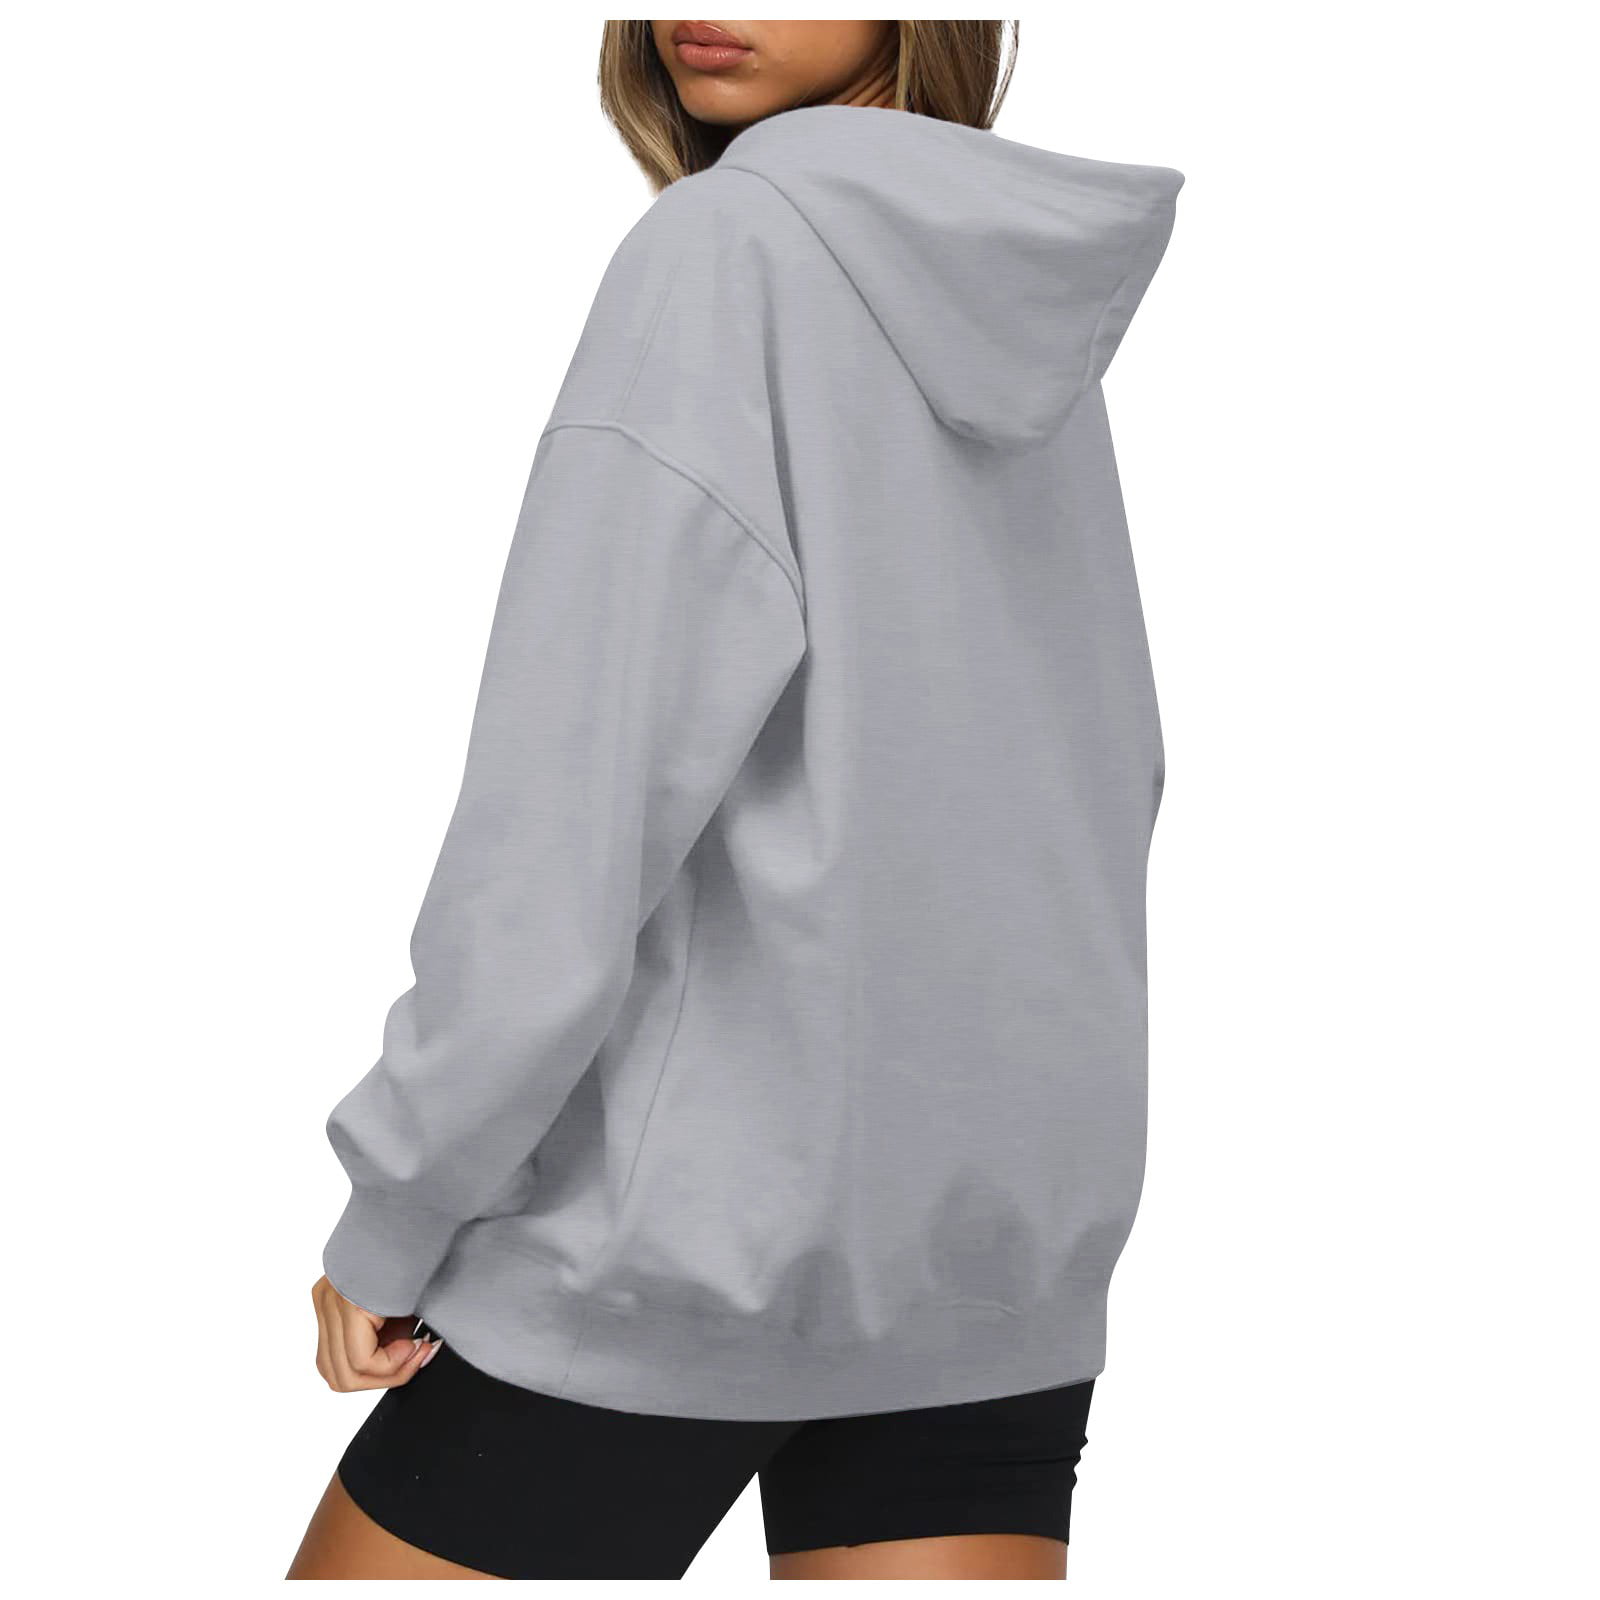  SHAOBGE Lightweight Sweatshirts Women Women's Drawstring  Pullover Hoodies Button Sweatshirts Down With Pocket Long (Grey, S) :  Clothing, Shoes & Jewelry